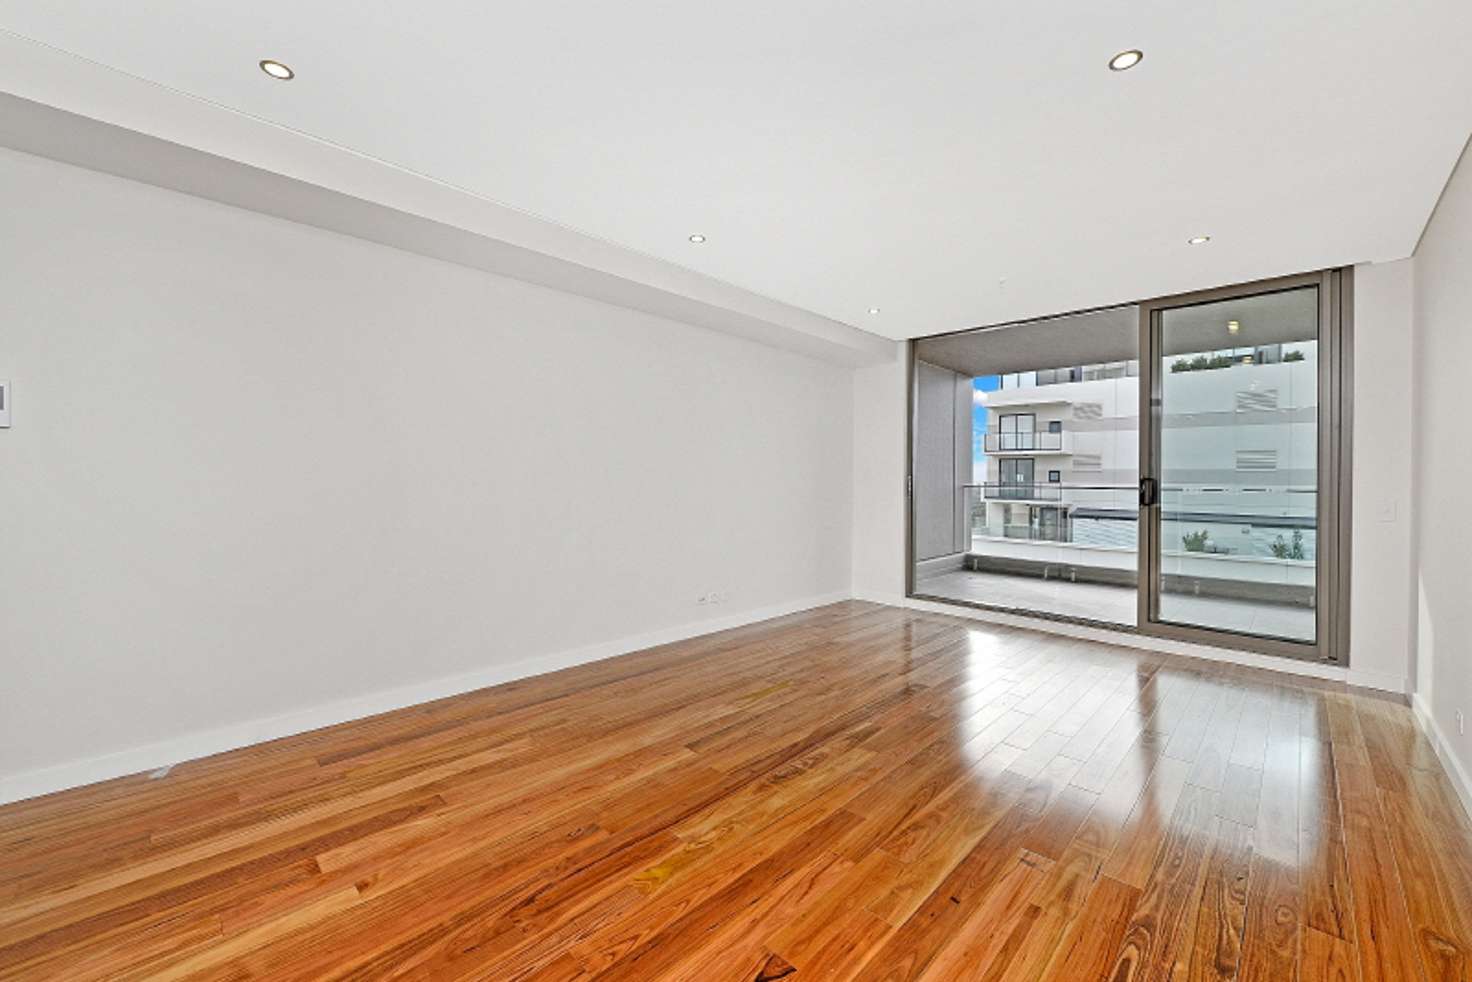 Main view of Homely apartment listing, 1103/5 Atchison St, St Leonards NSW 2065